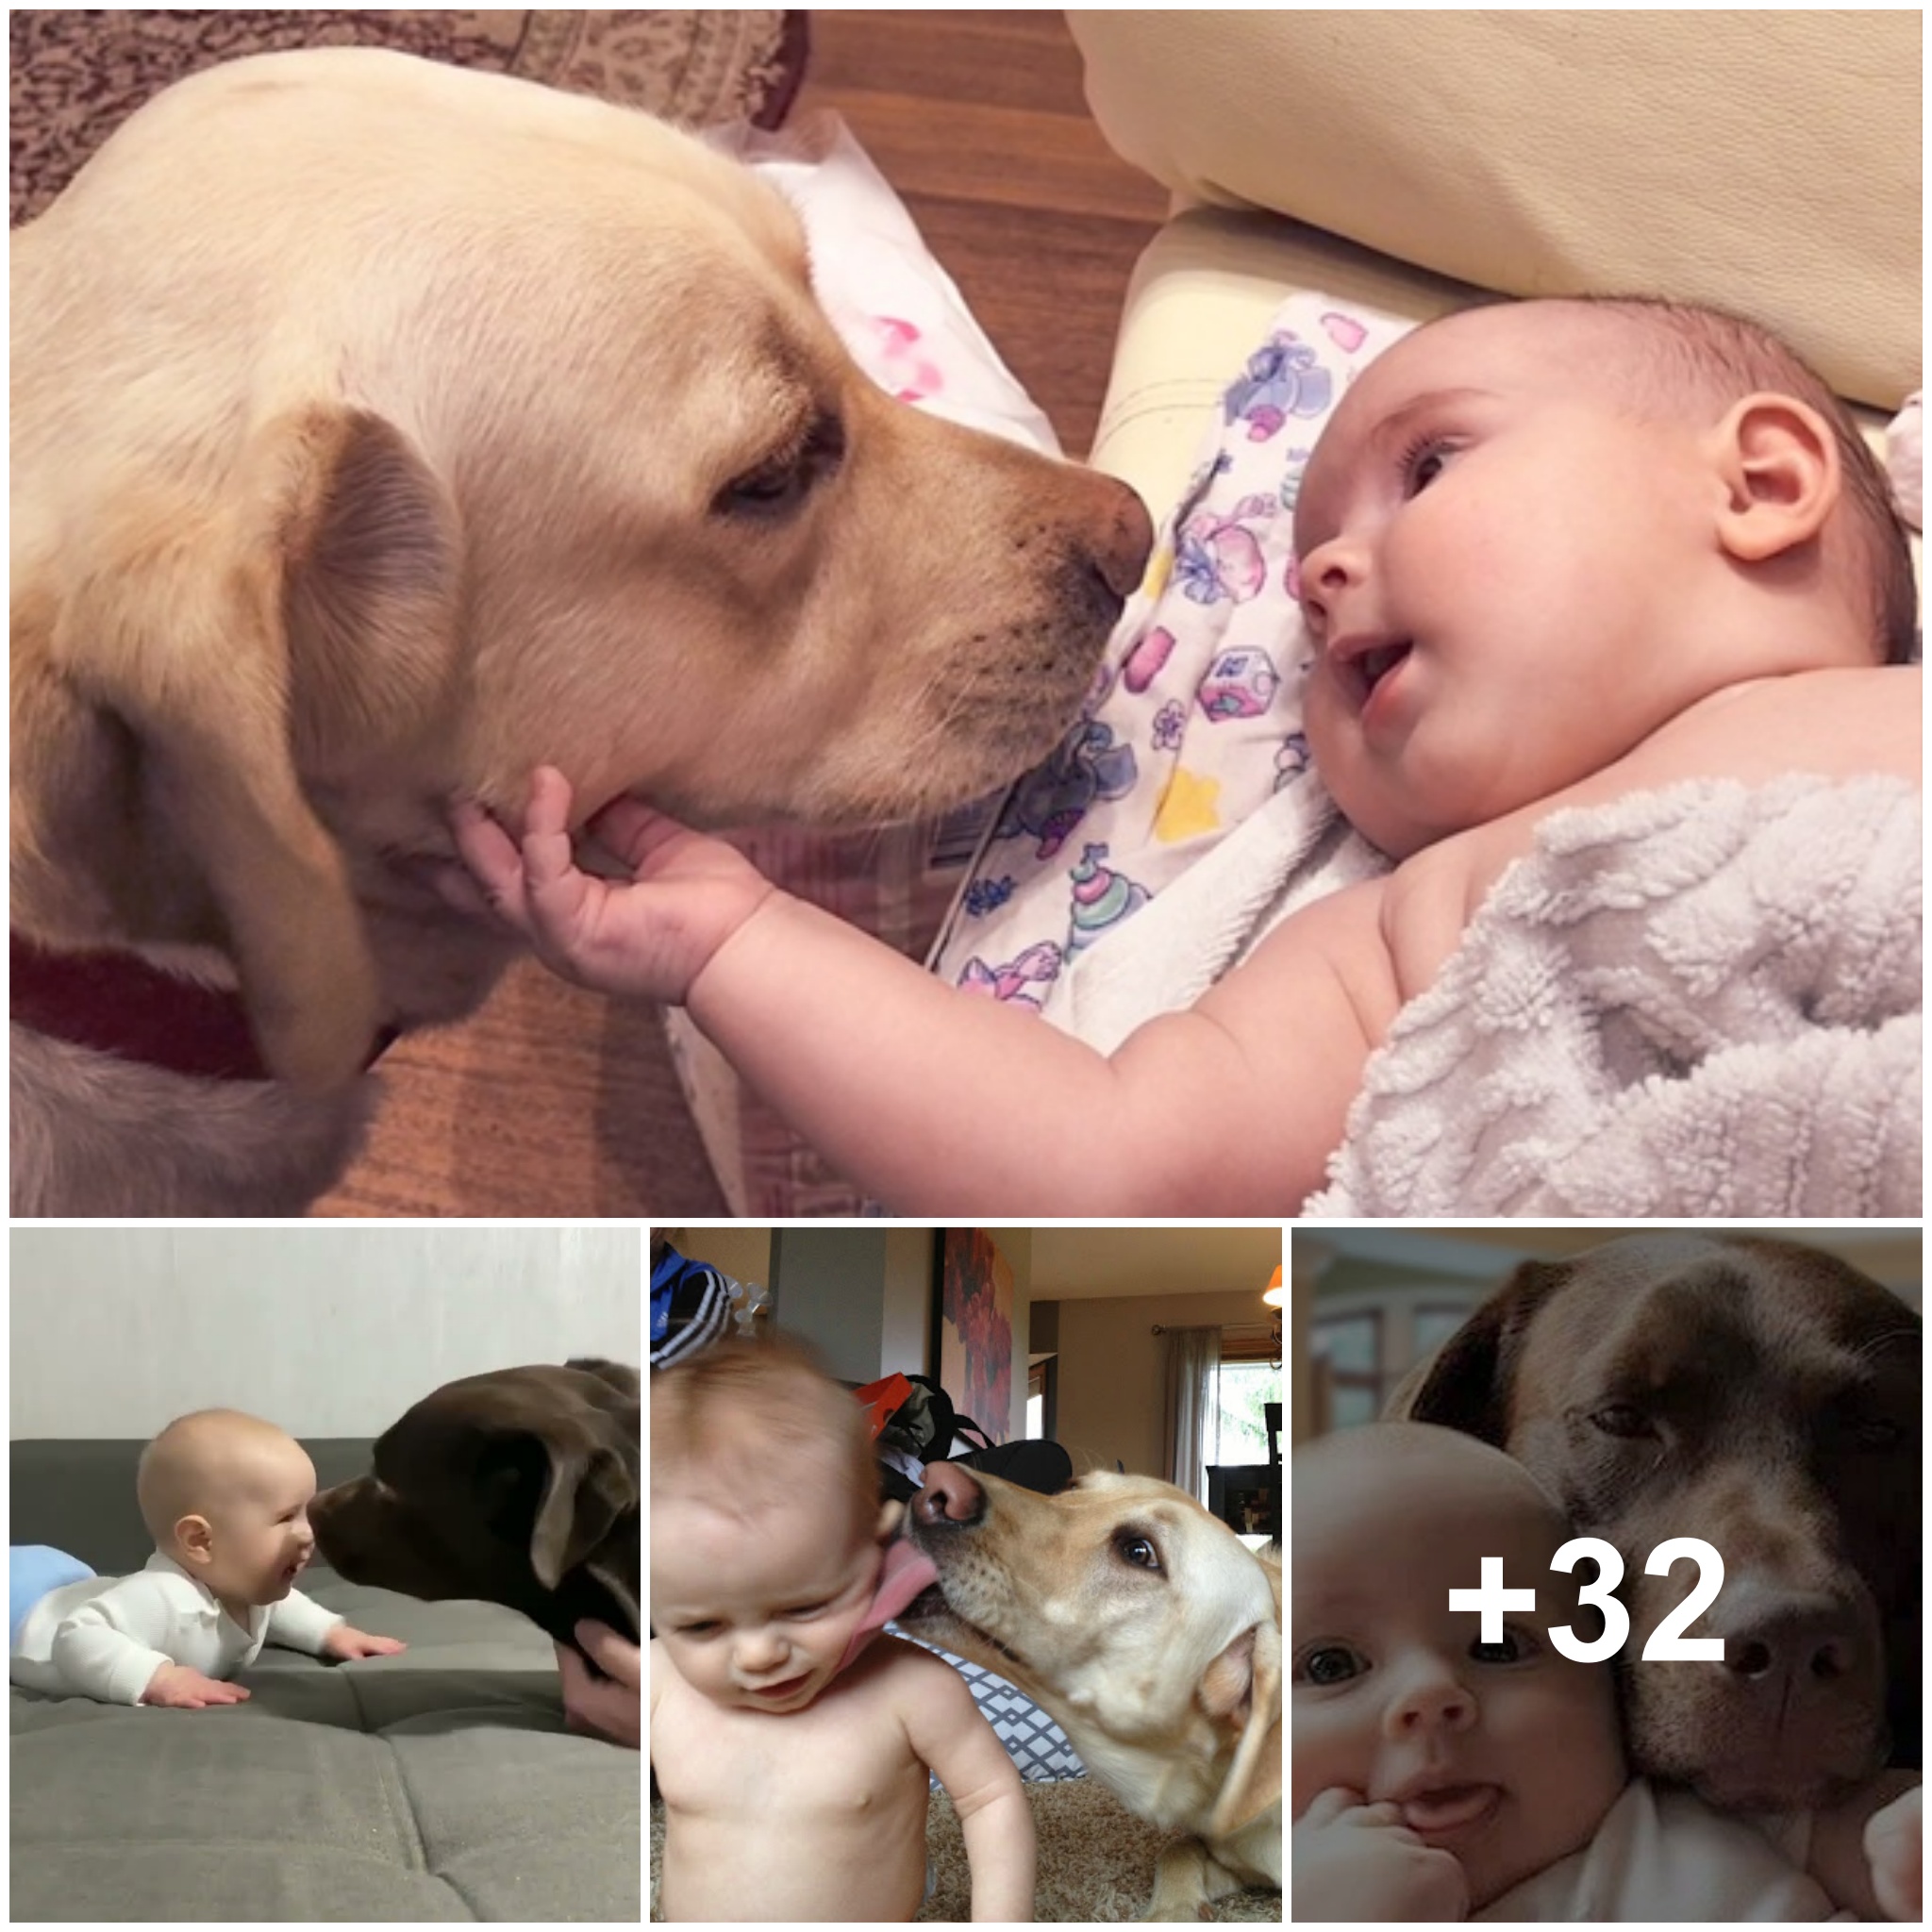 A newborn baby’s adorable gestures towards the dog during their first meeting have touched the hearts of millions. (Video)